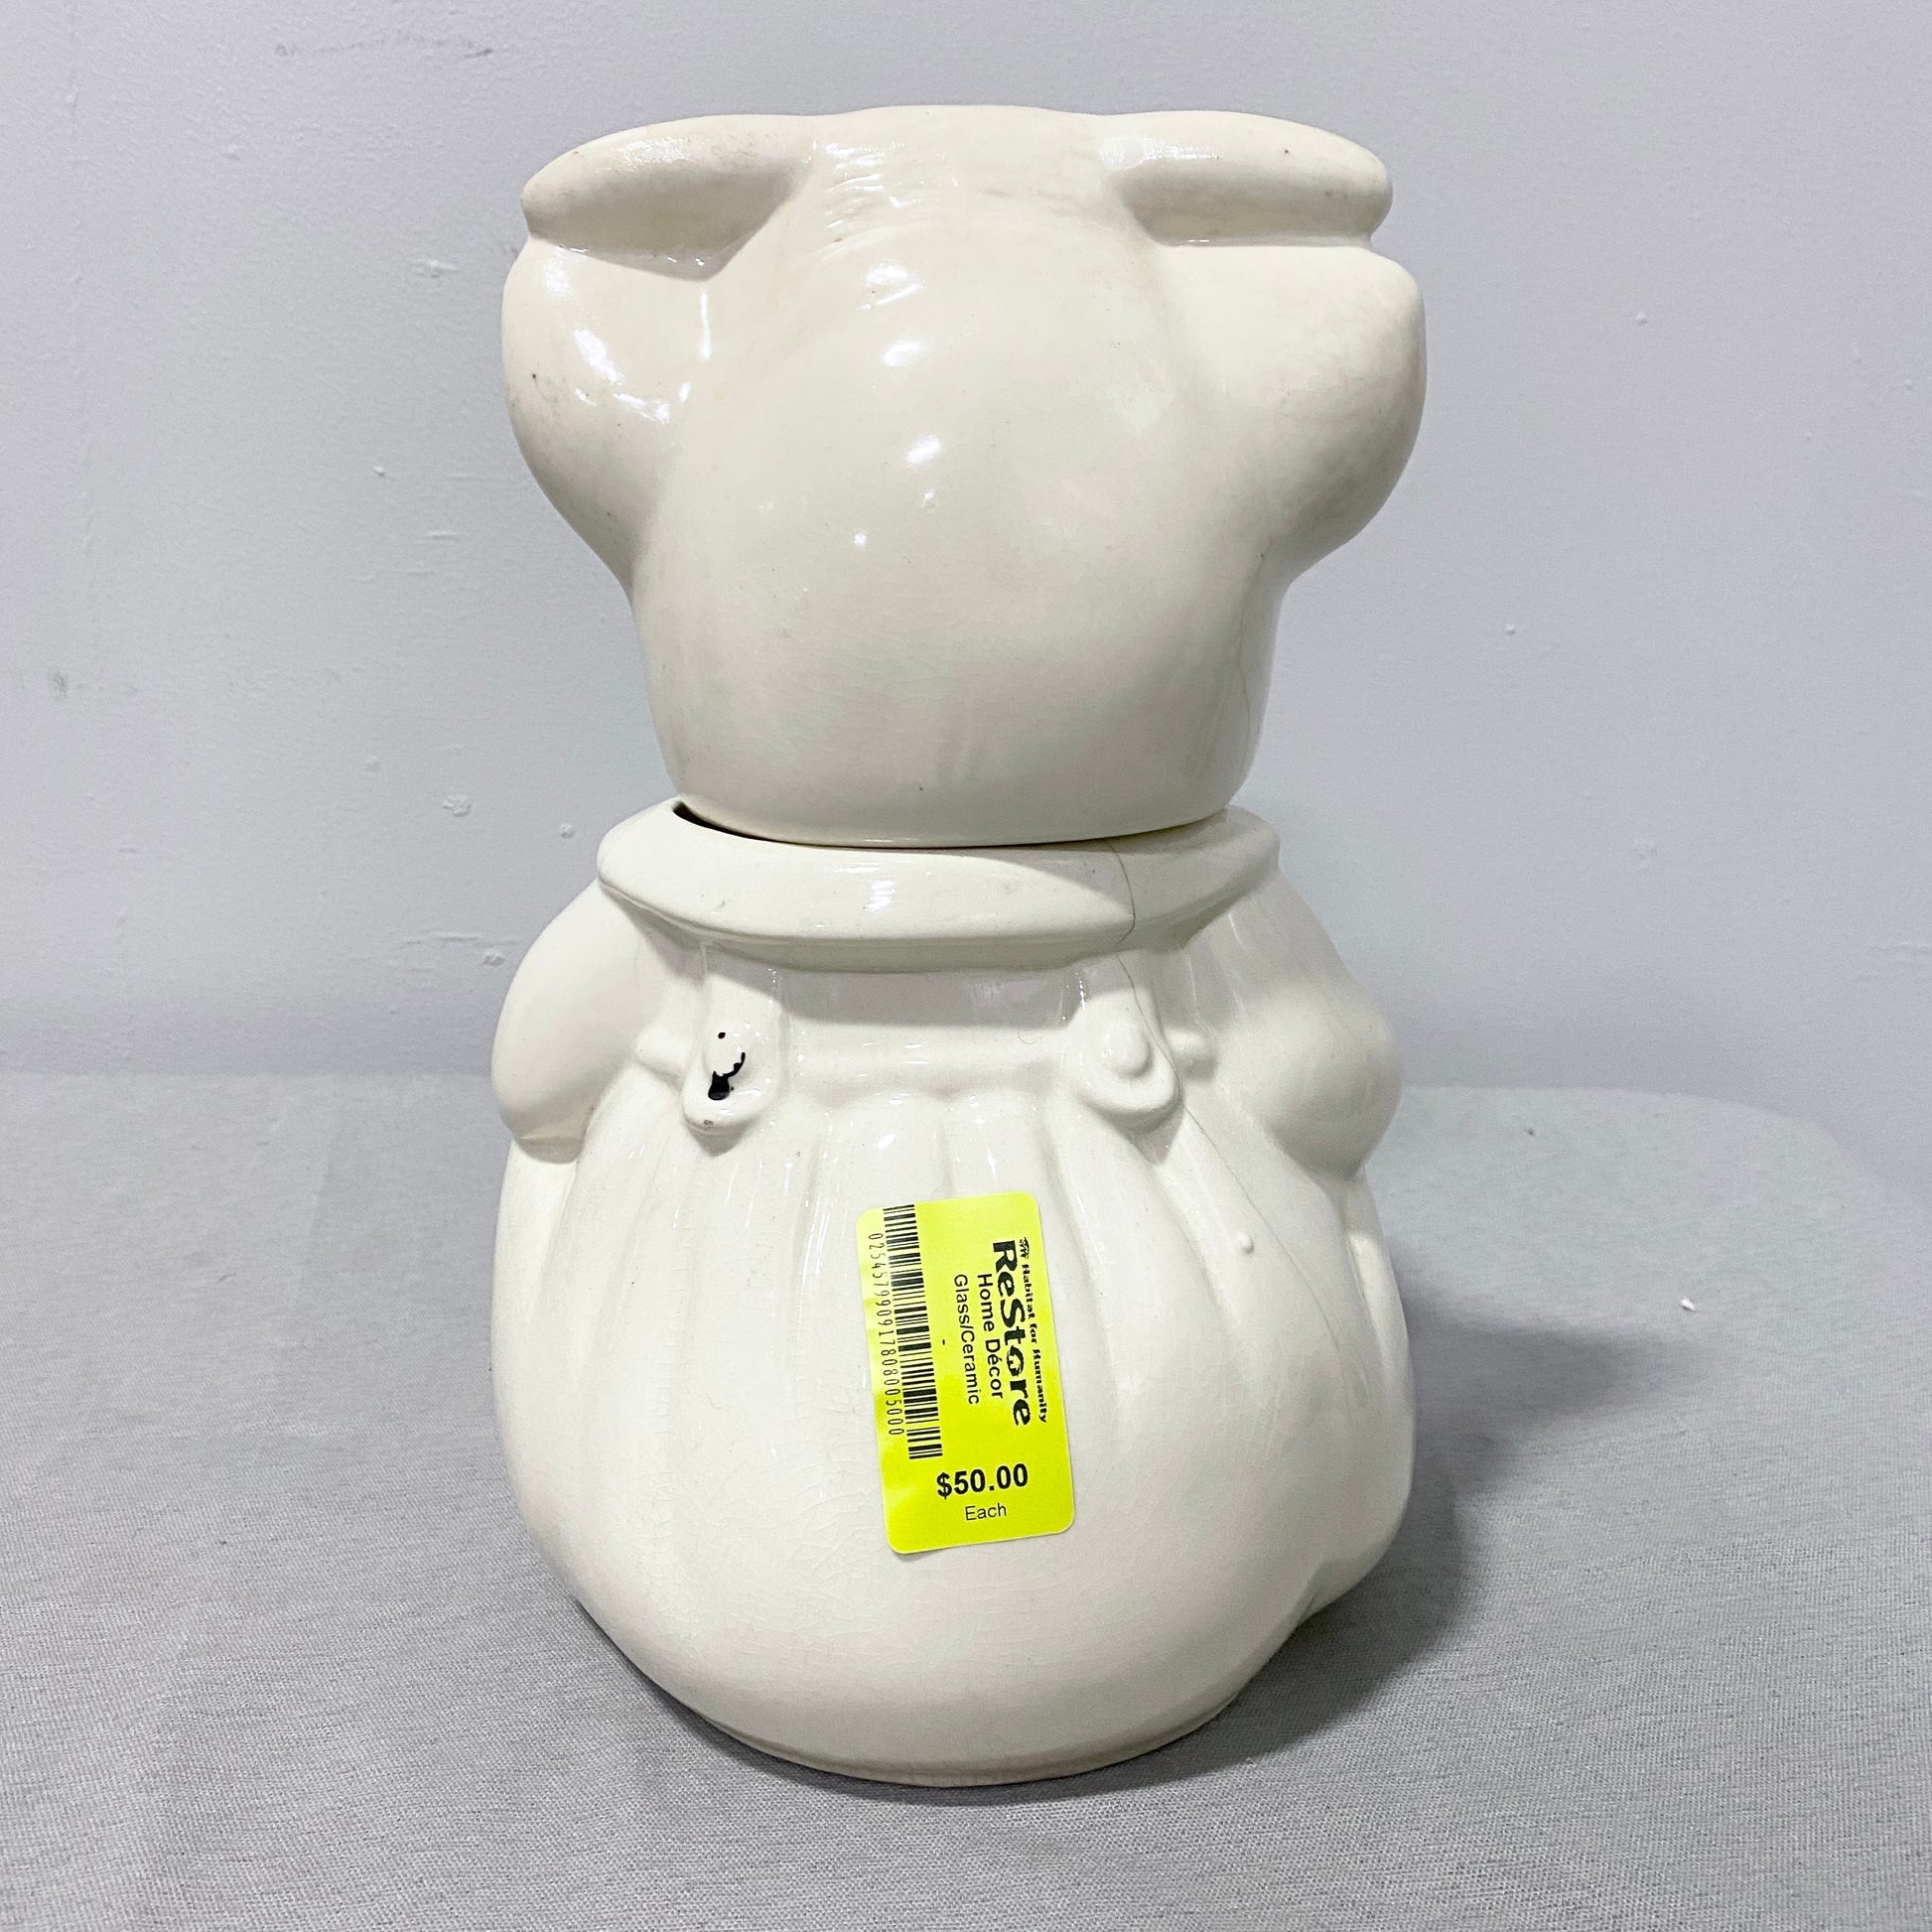 Shawnee Pottery pig cookie jar available in Calgary AB.